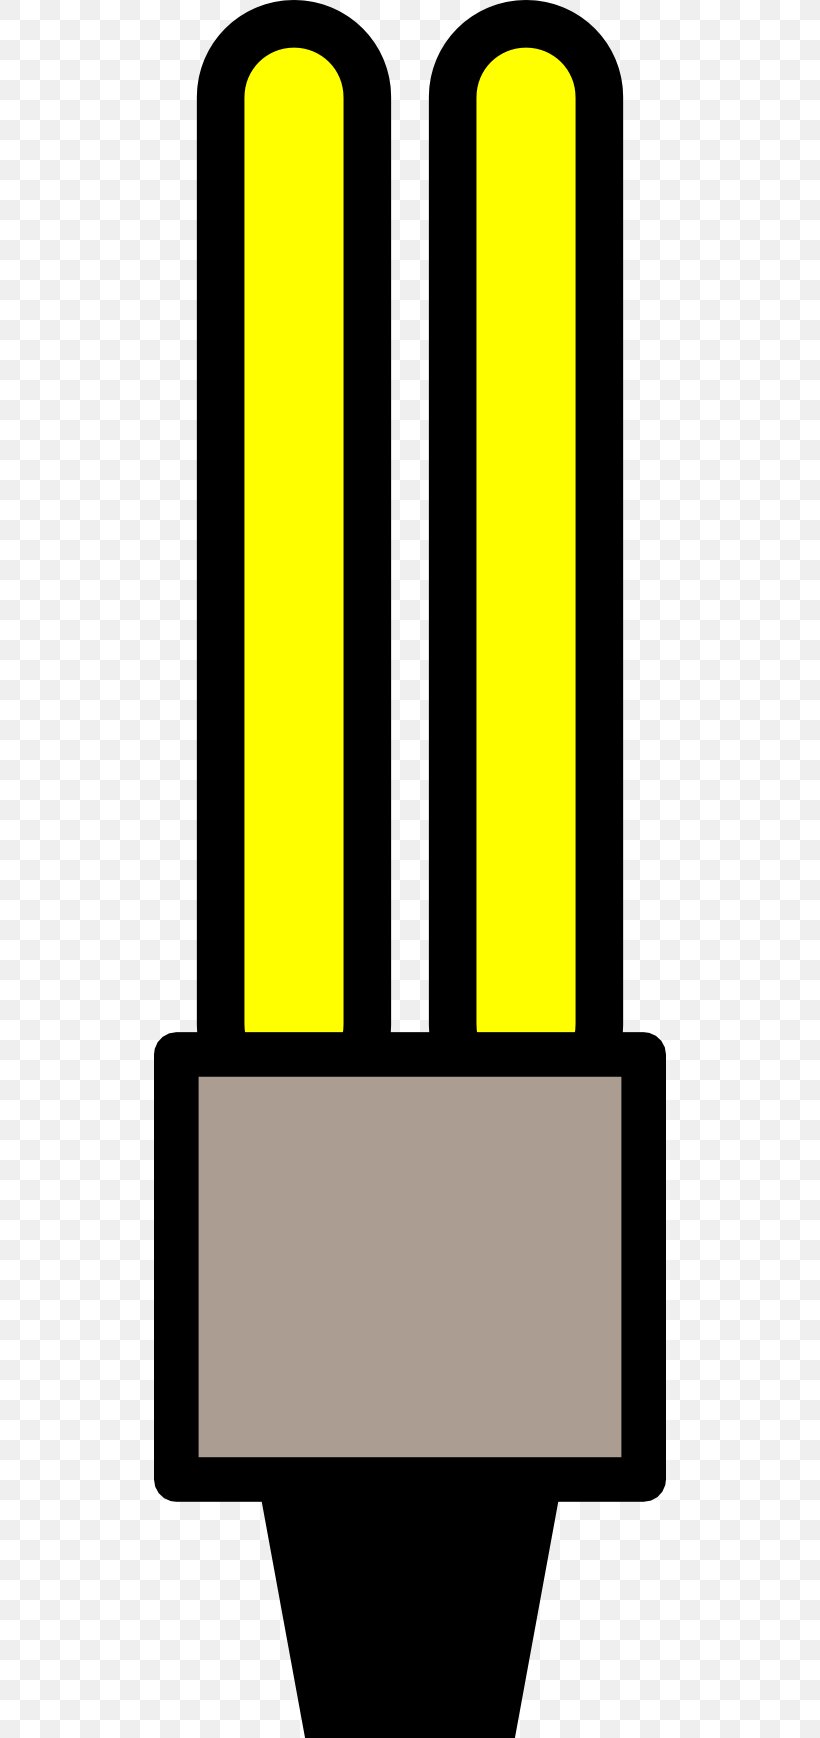 Incandescent Light Bulb Compact Fluorescent Lamp Clip Art, PNG, 512x1738px, Light, Compact Fluorescent Lamp, Electric Light, Electrical Energy, Electricity Download Free